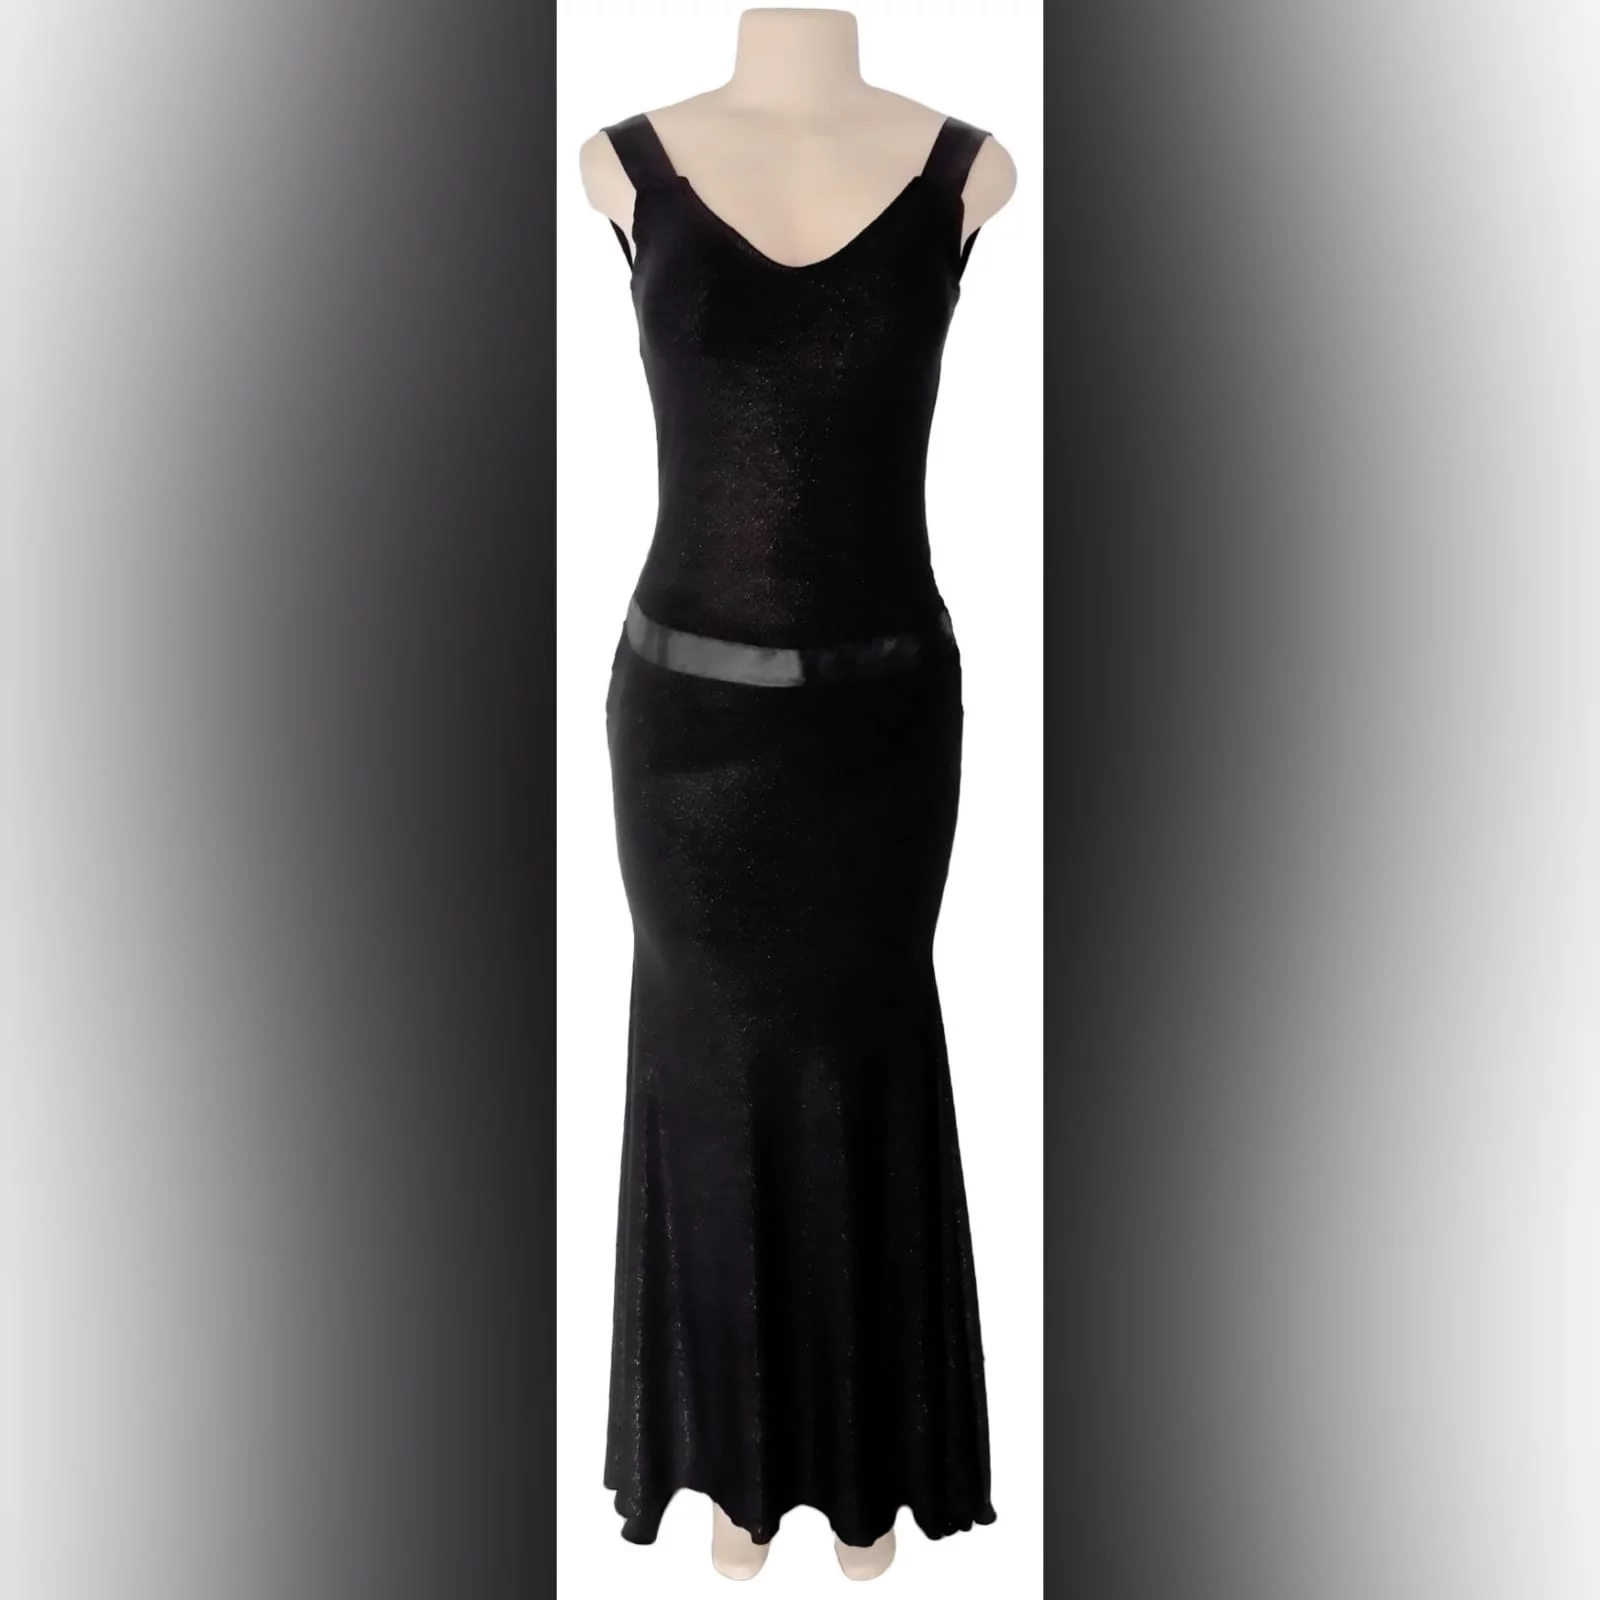 Black shimmer long gala evening dress 3 black shimmer long gala evening dress, with a low v open back. With ribbon creating a belt and a cross at the back